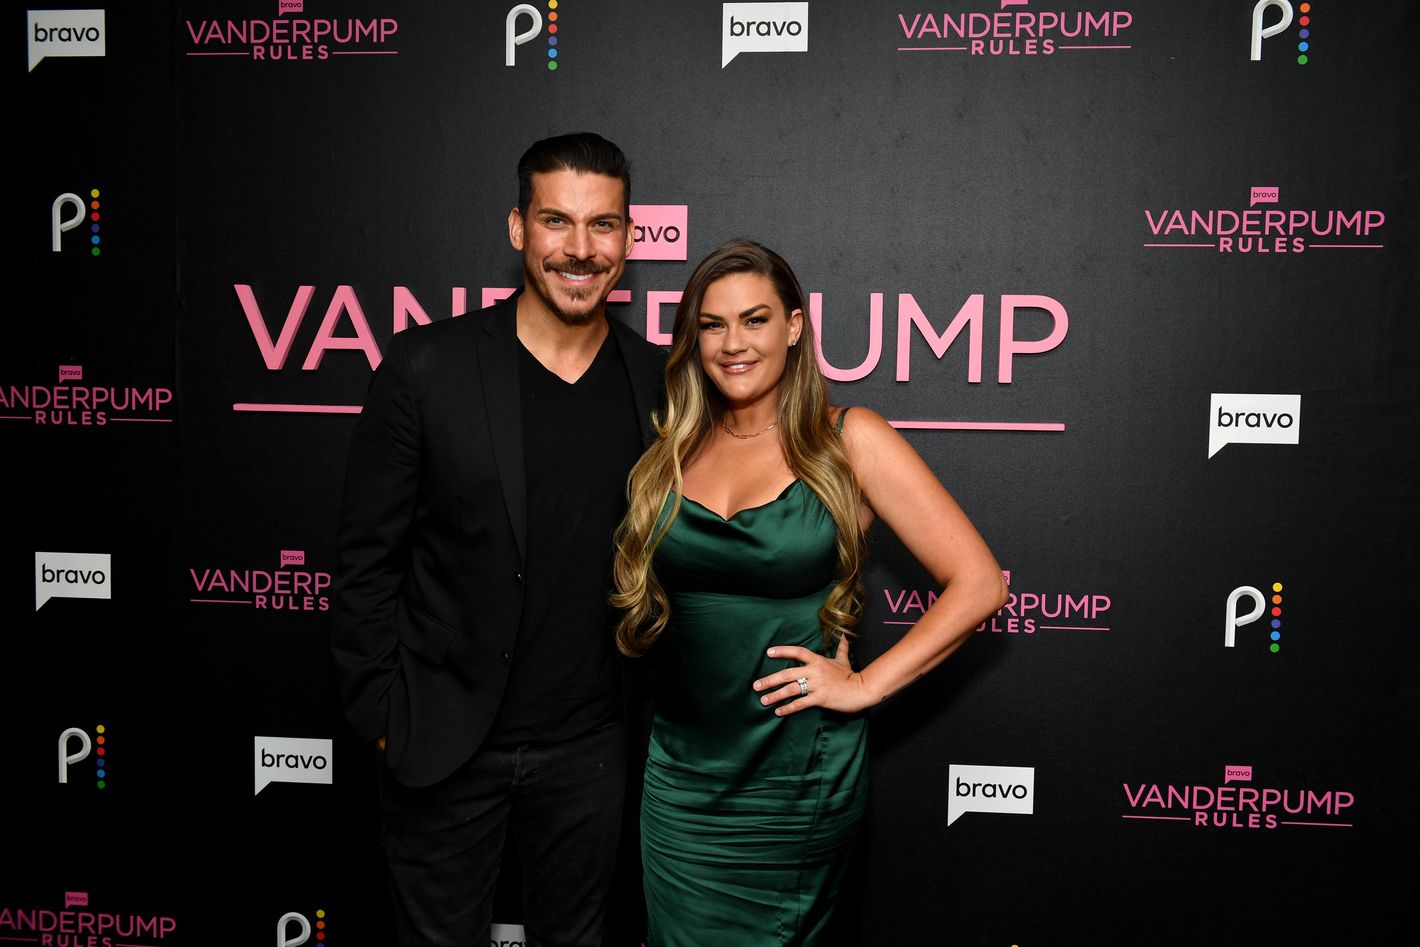 Which Other Vanderpump Rules Stars Should Be Invited to the WHCD?